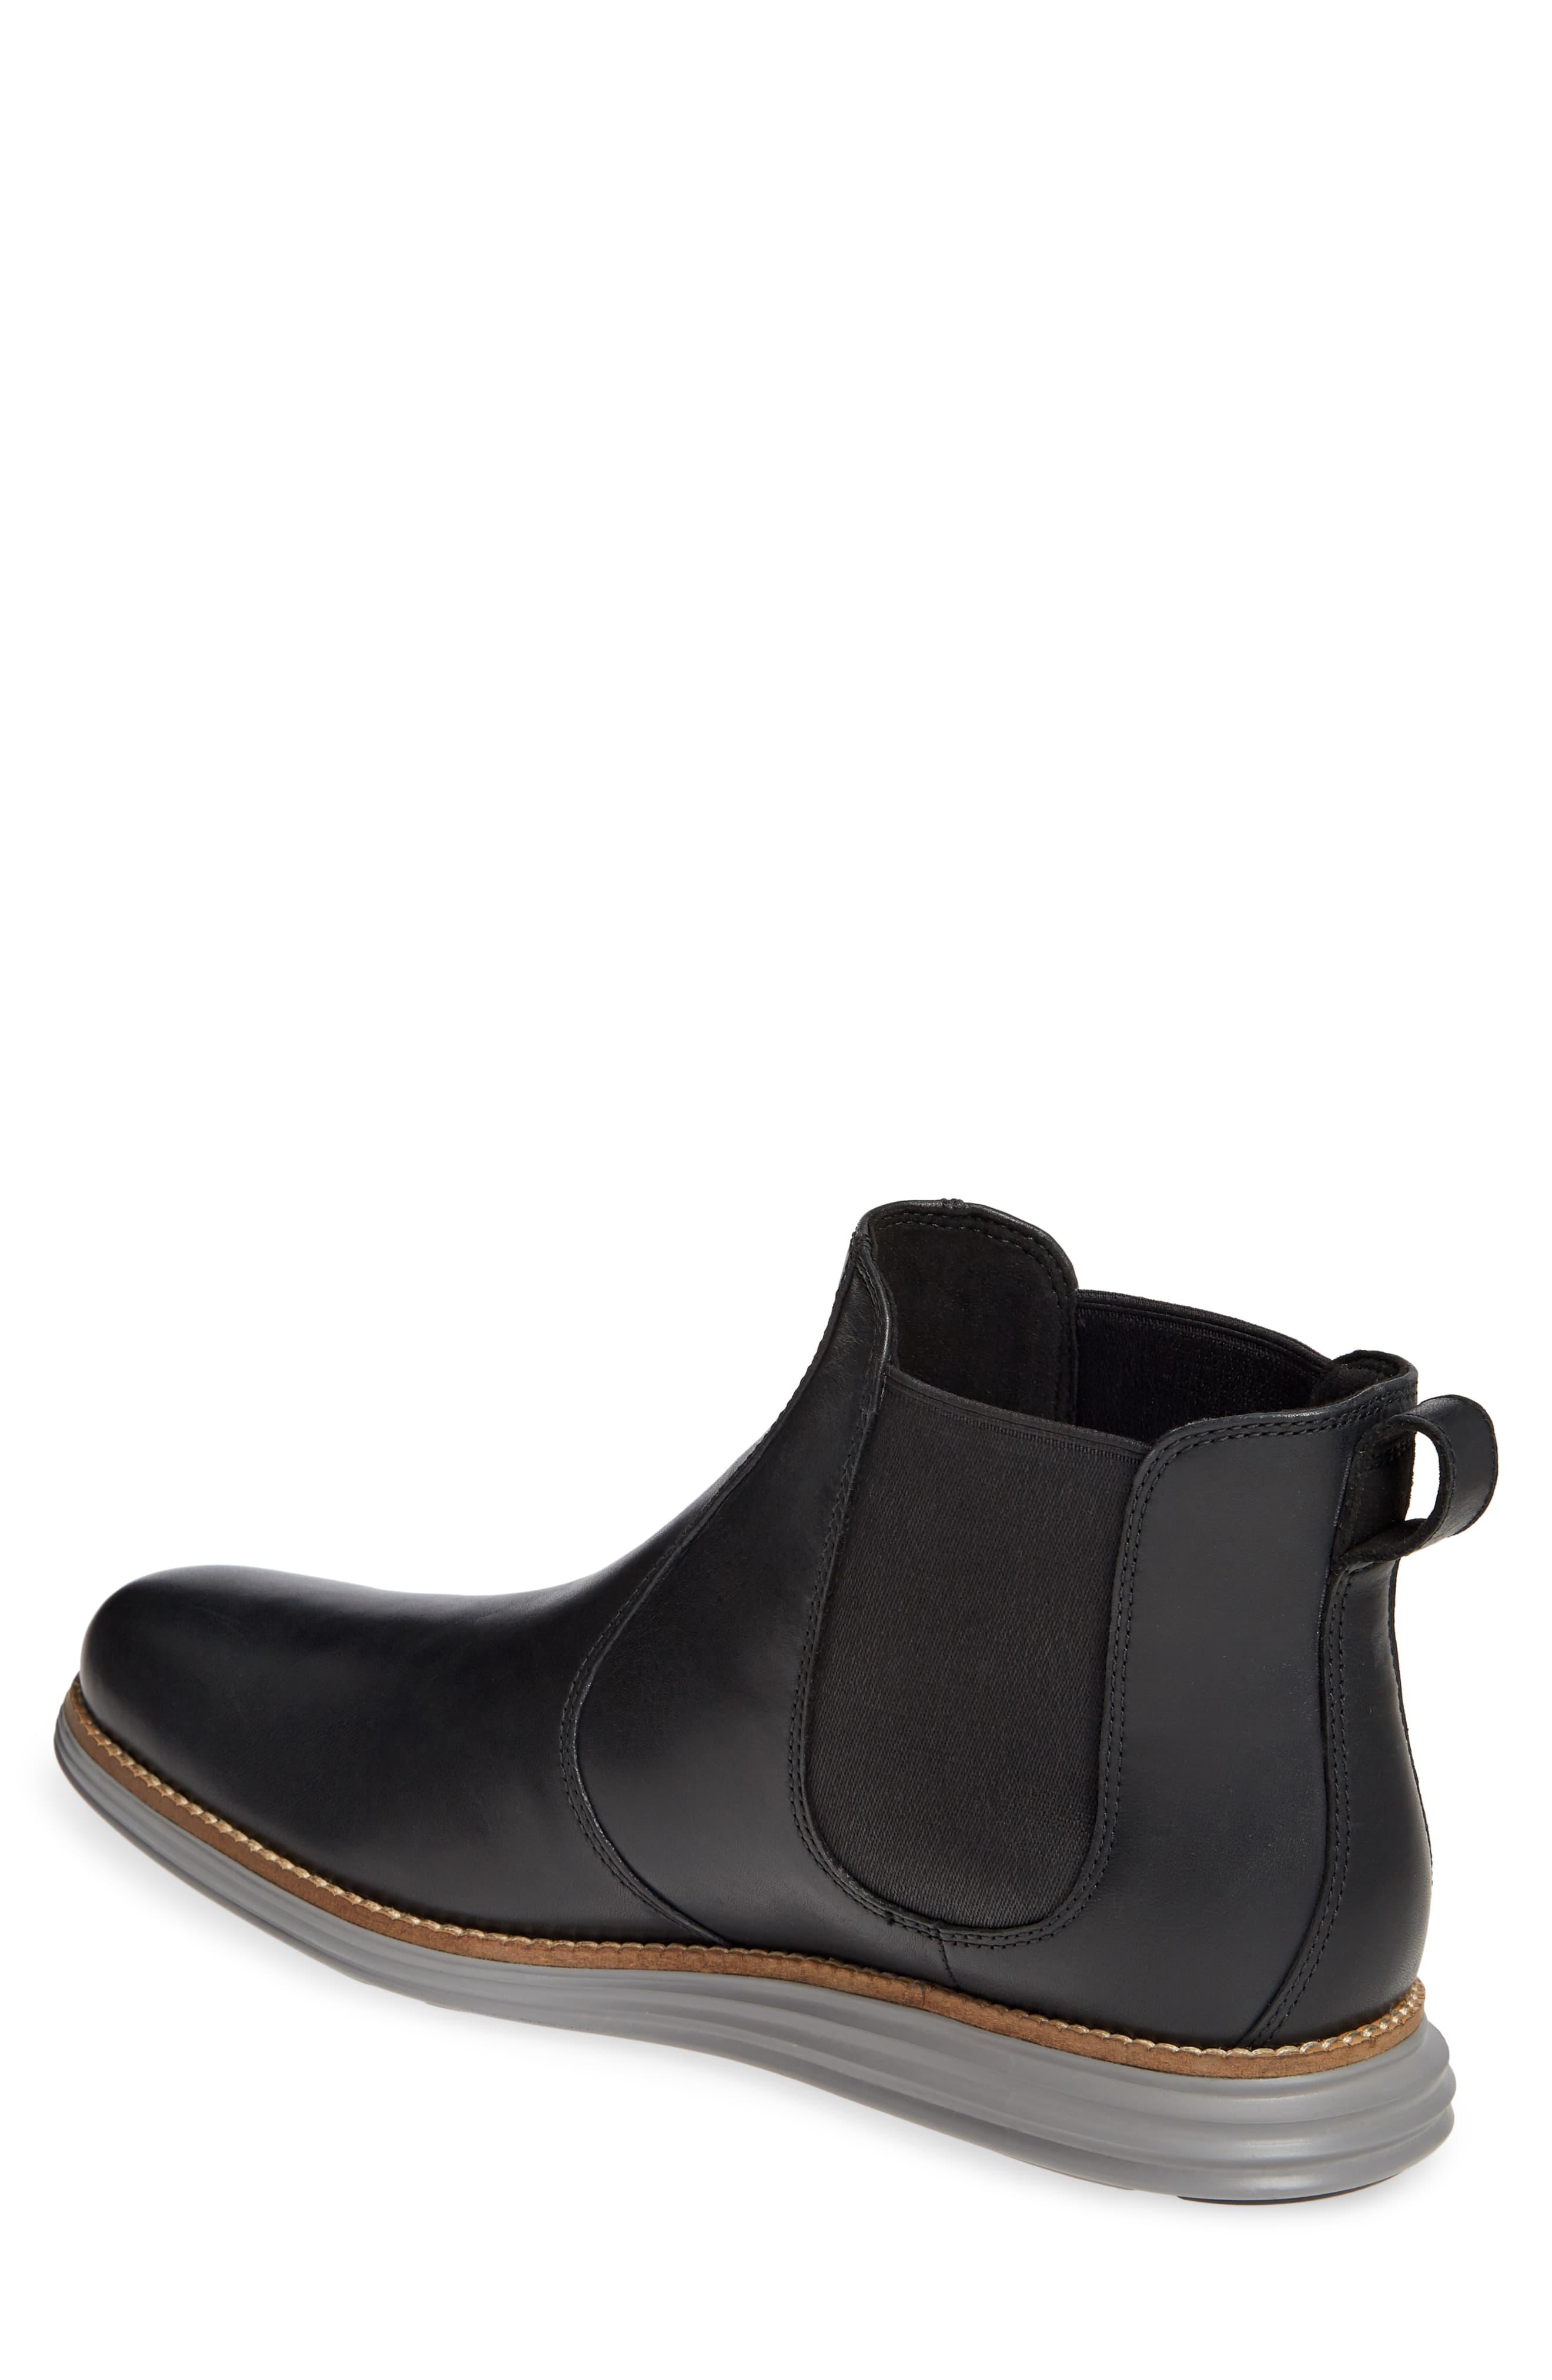 Cole Haan Original Grand Waterproof Leather Chelsea Boots in Black for